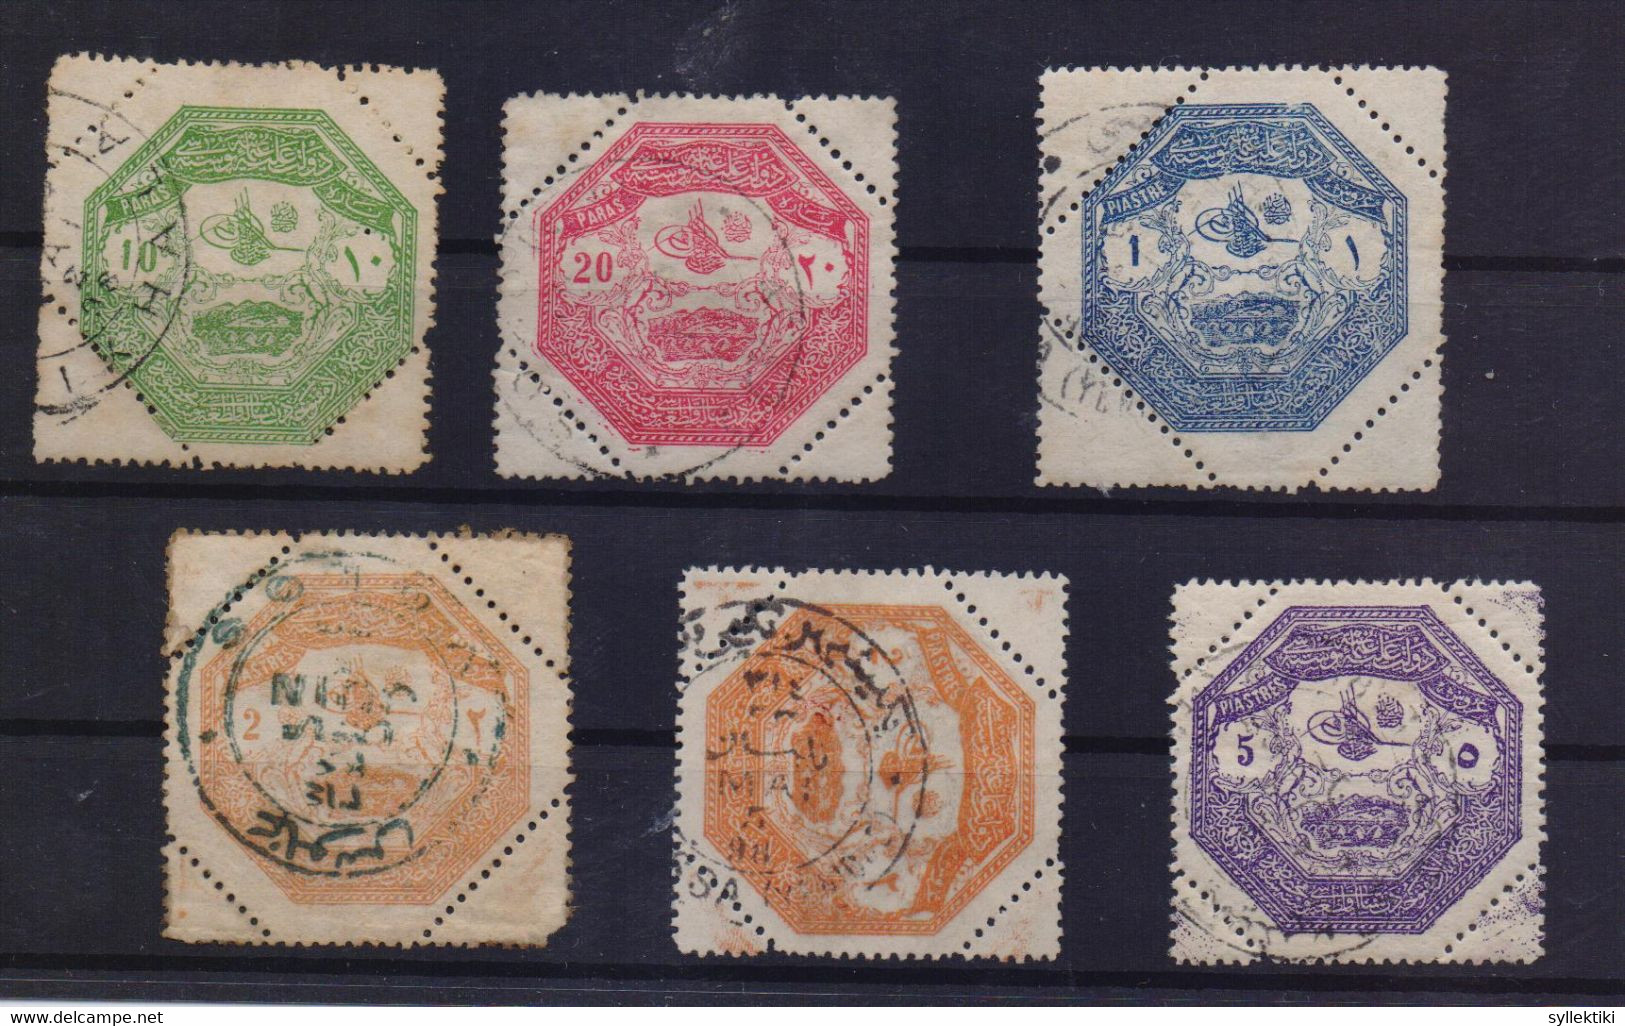 GREECE 1898 THESALLY COMPLETE SET USED STAMPS - Tessaglia